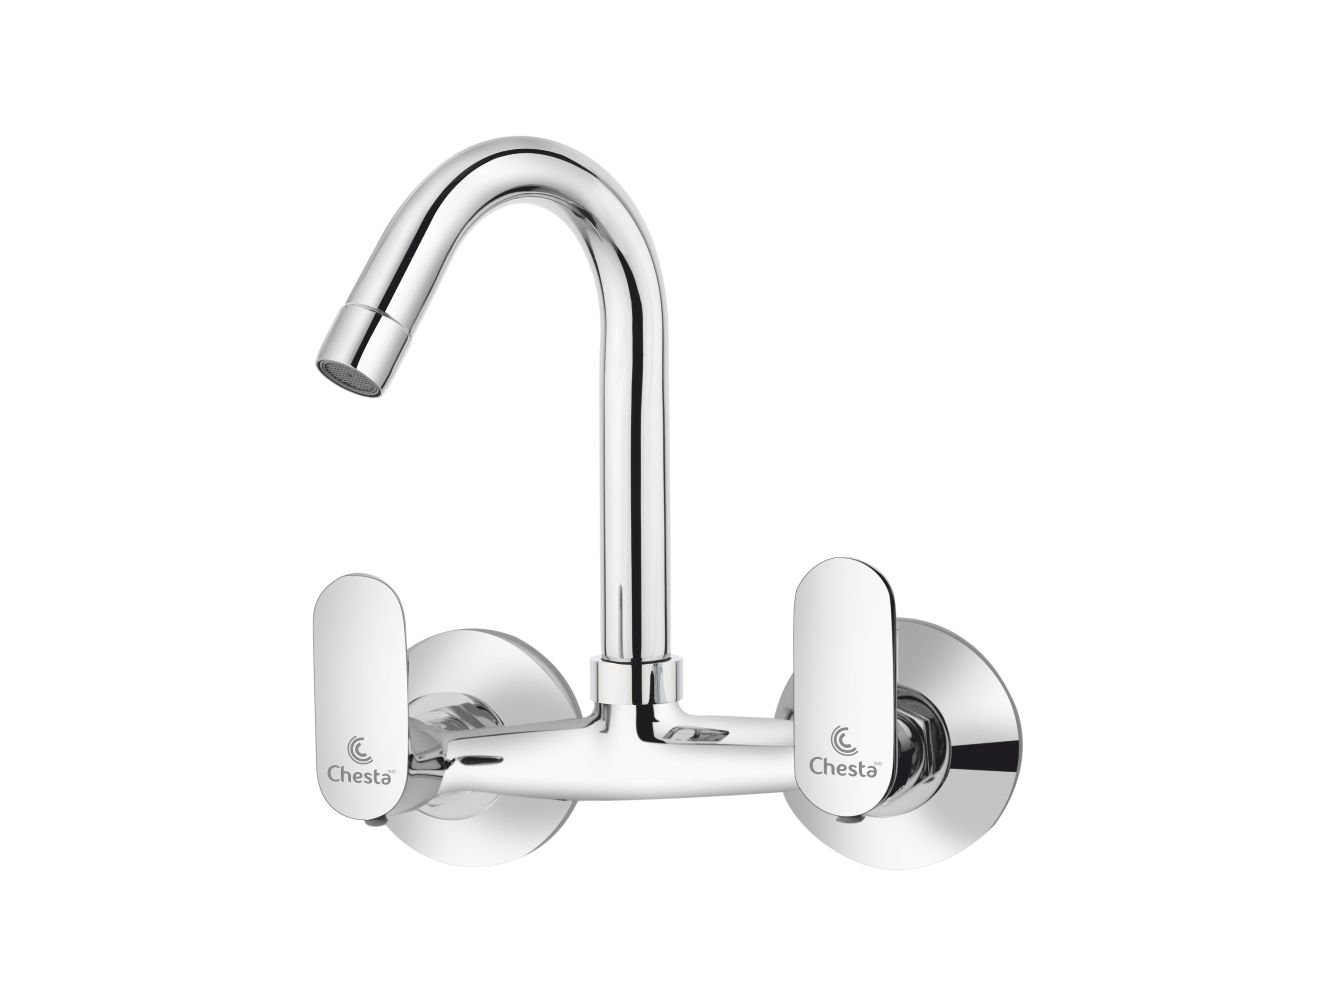 MO - 1019 - Sink Mixer by Chesta Bath Fittings